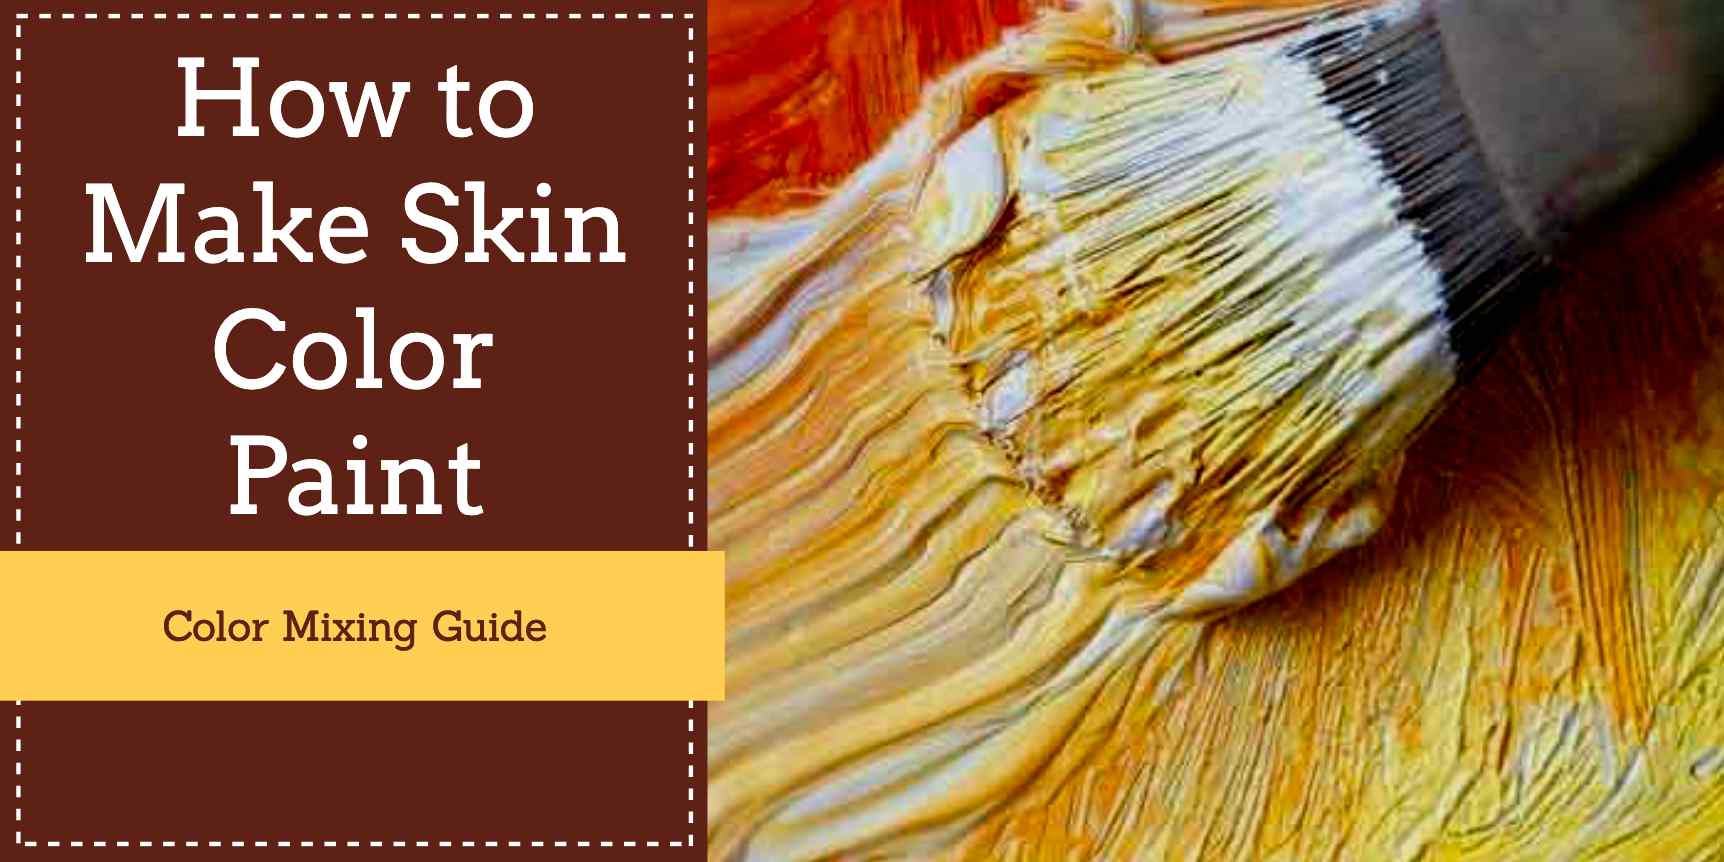 How to make skin color paint